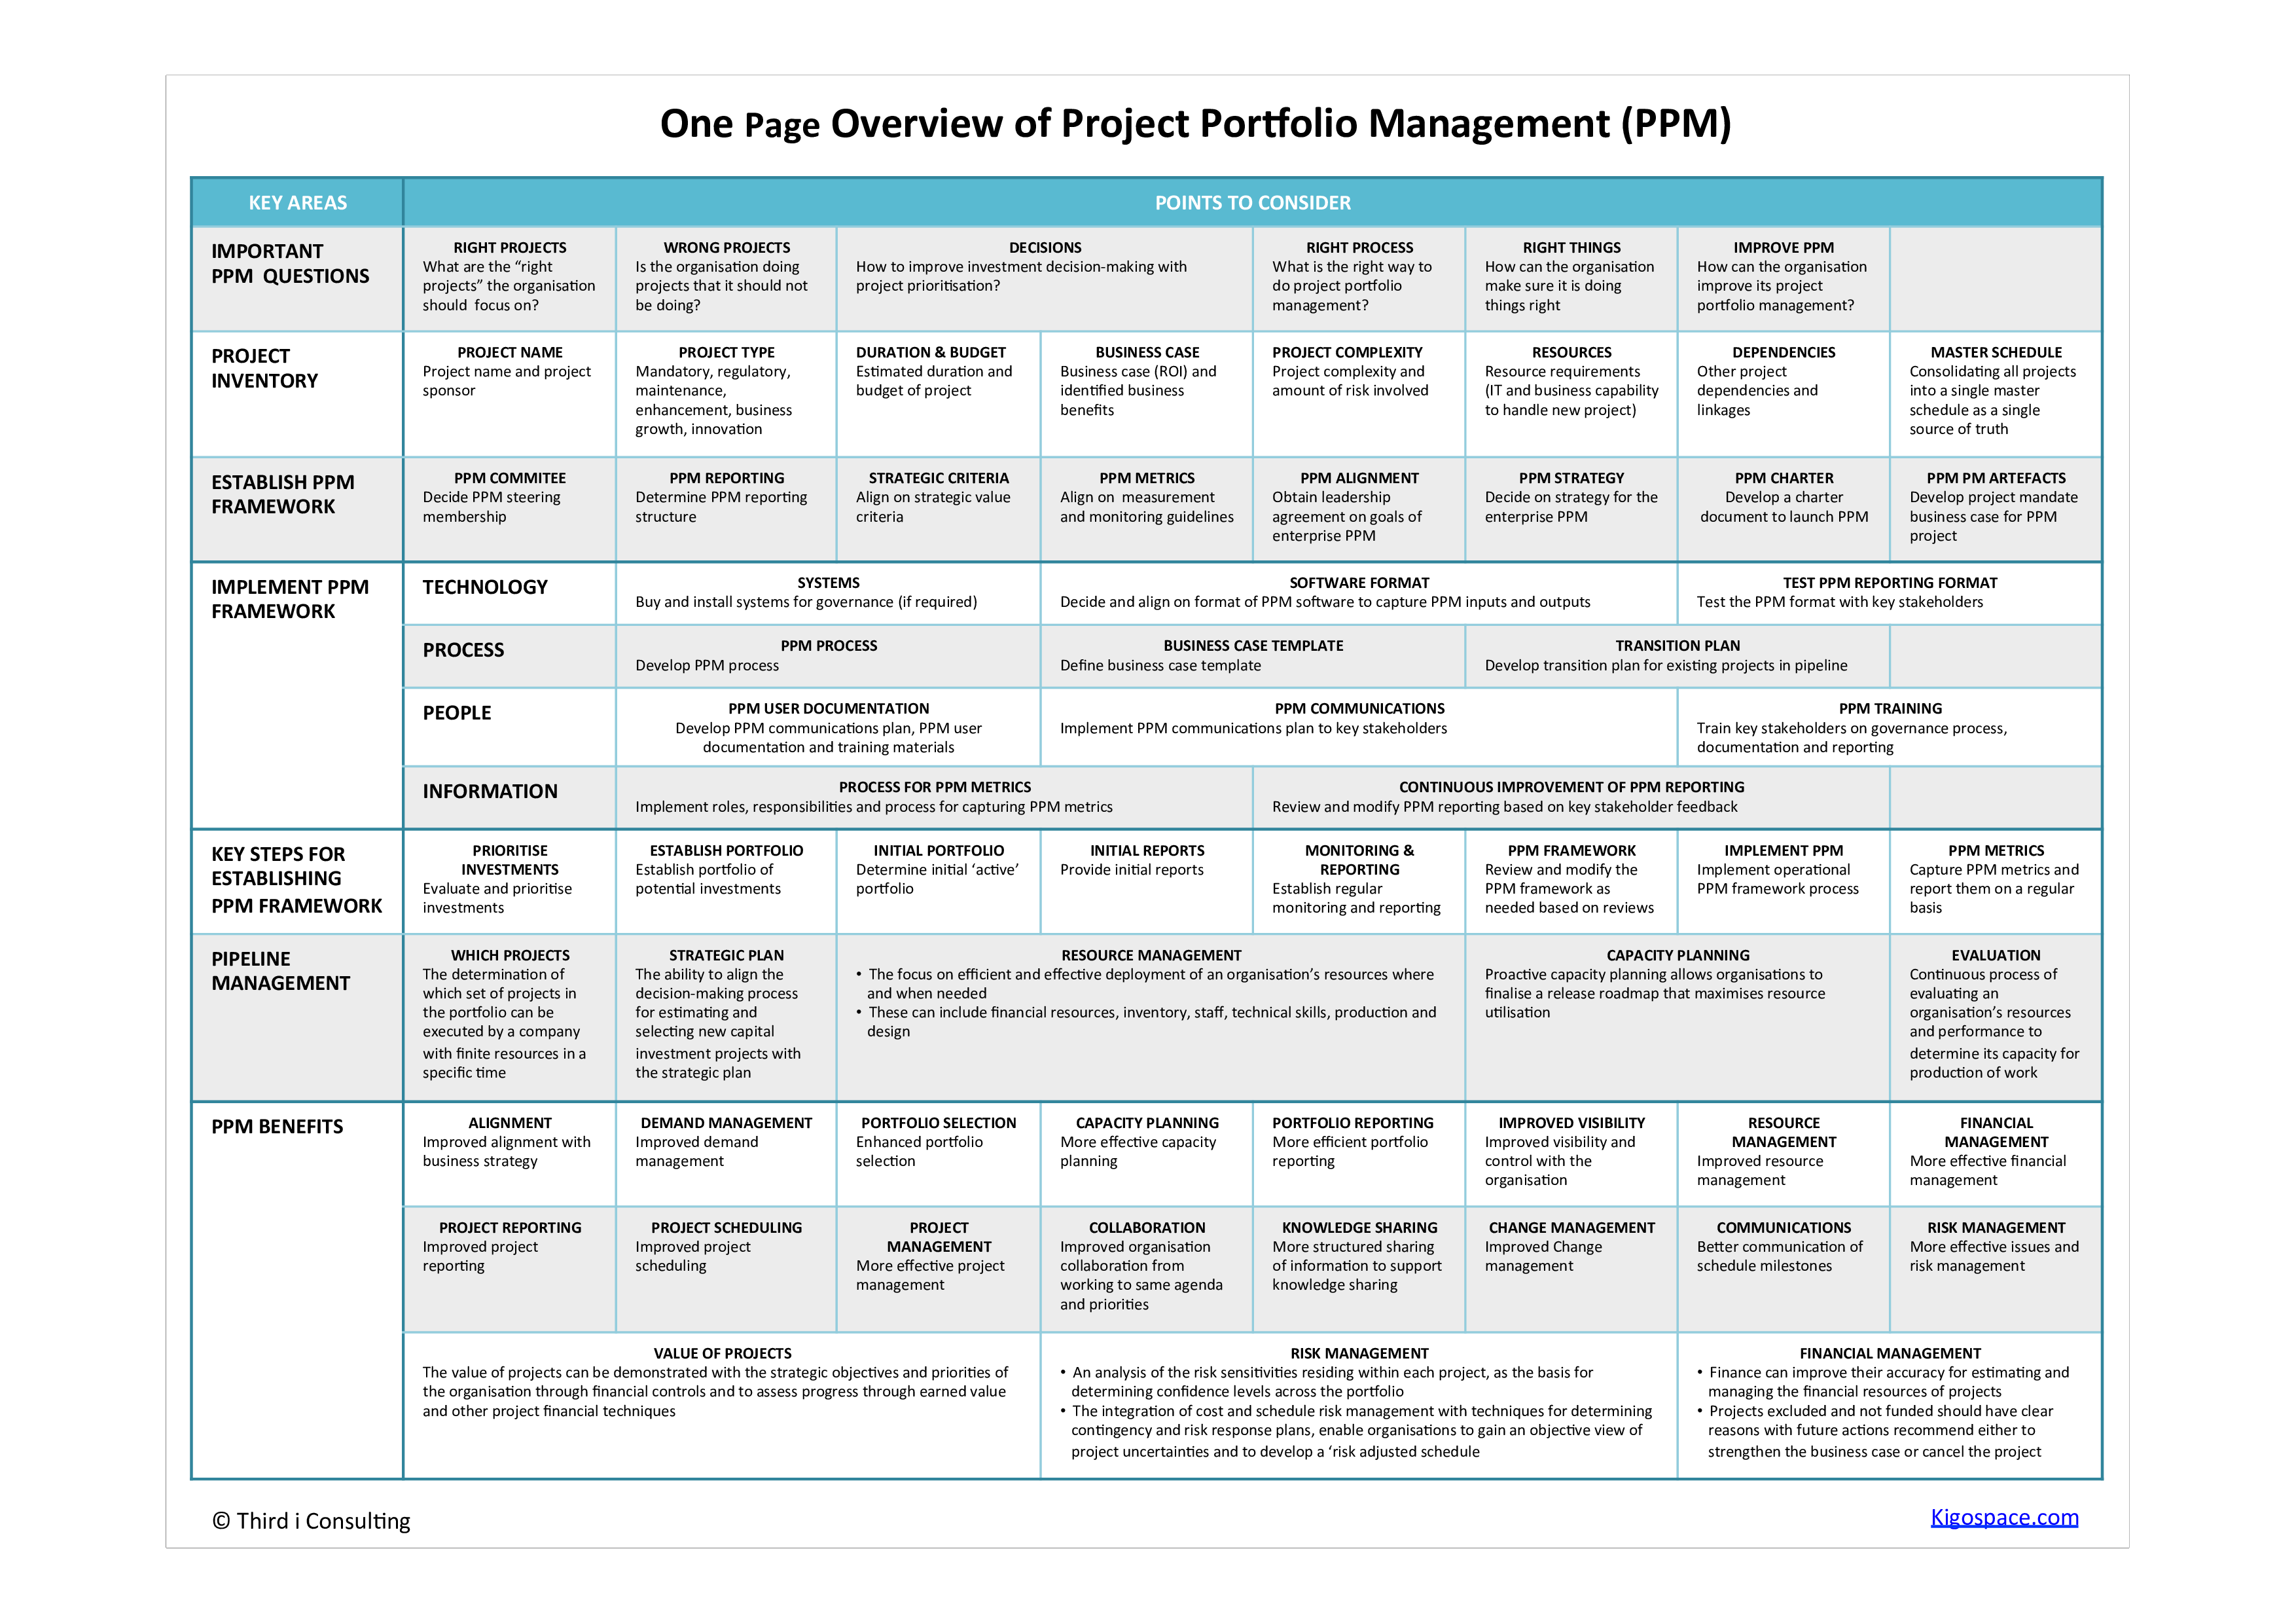 Project Portfolio Management One Page Overview main image